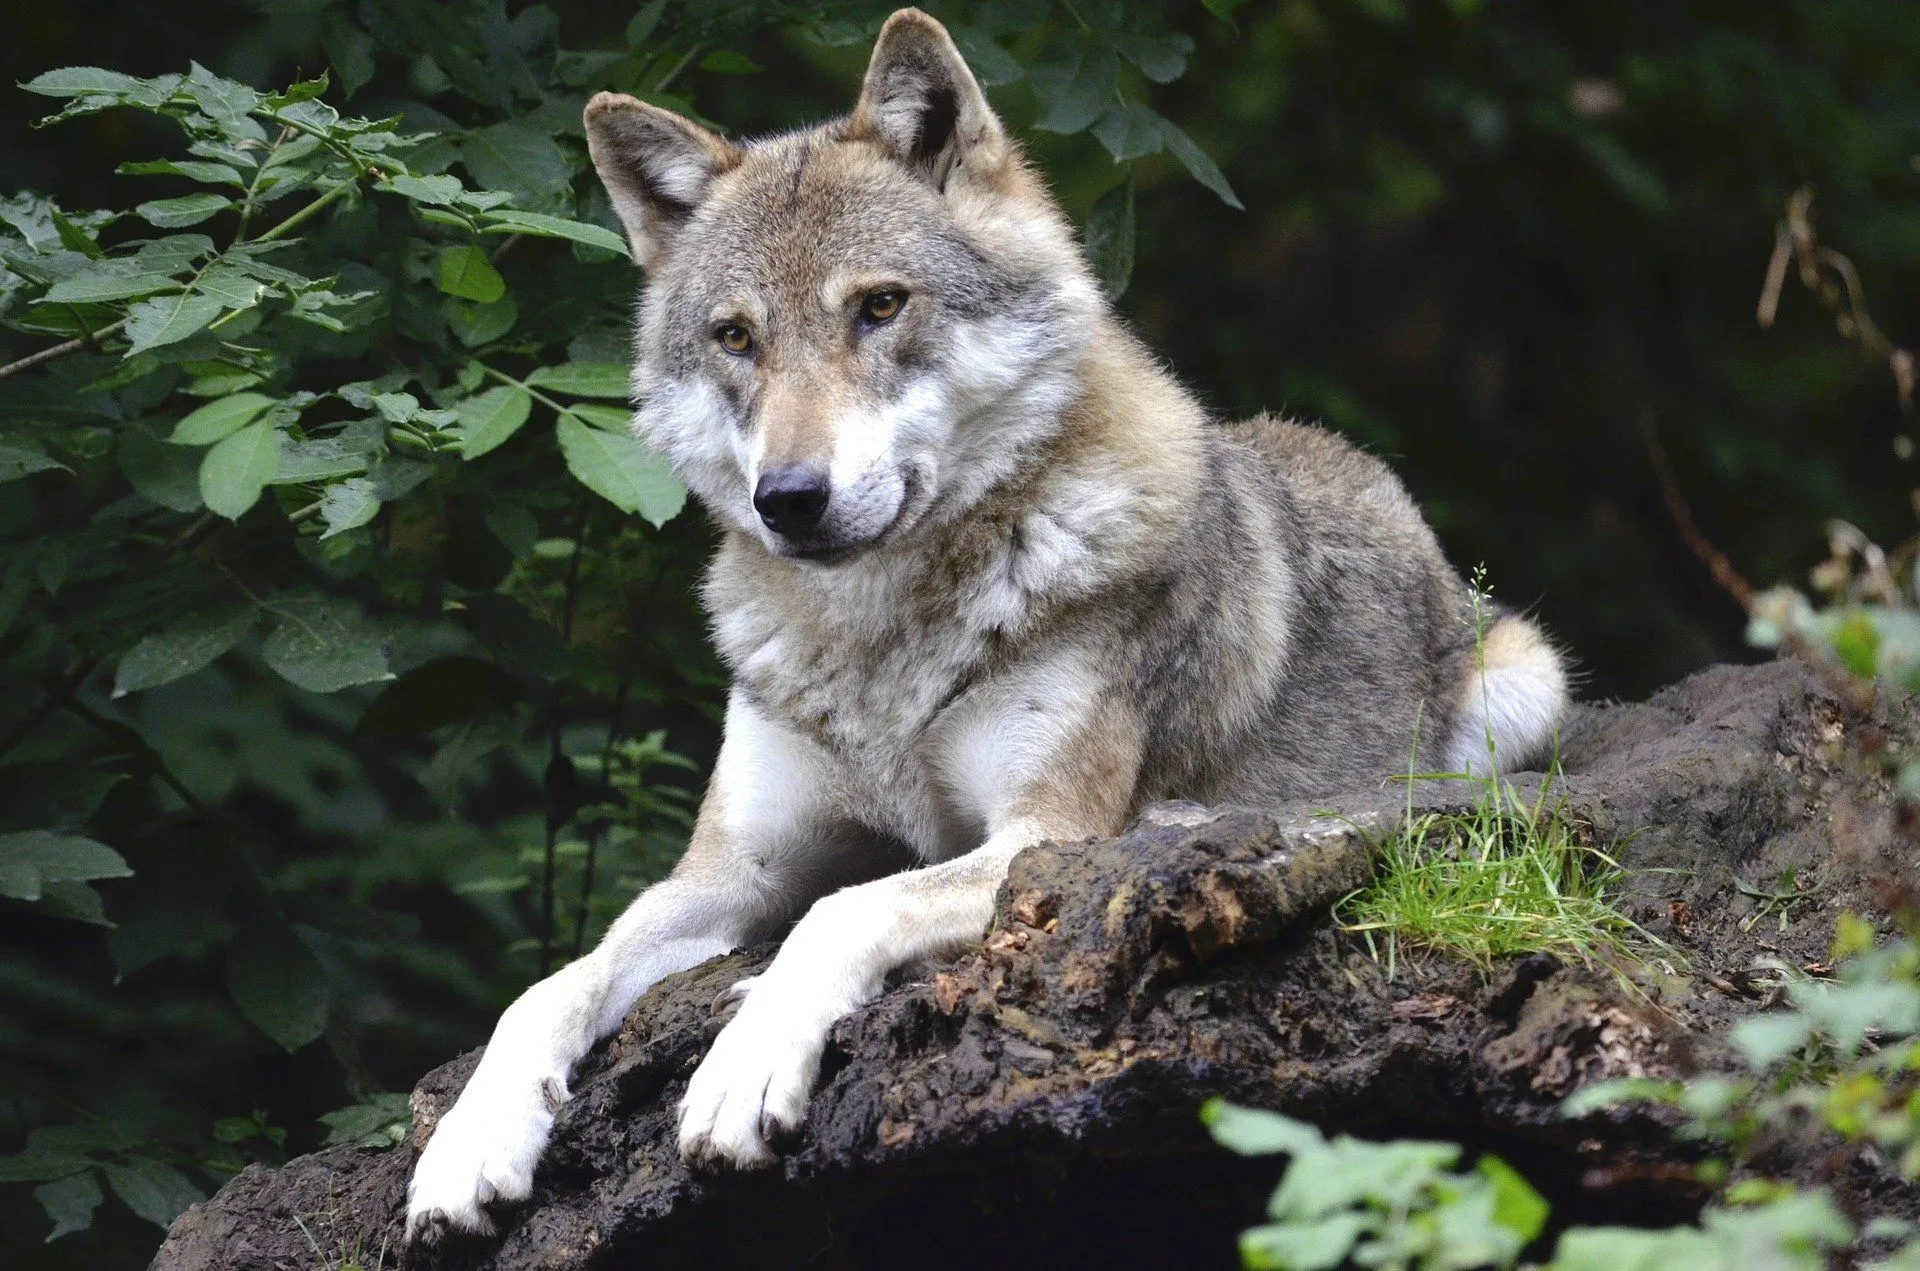 North American wolves rarely contract rabies since the population of the primary carriers, jackals, is lower.